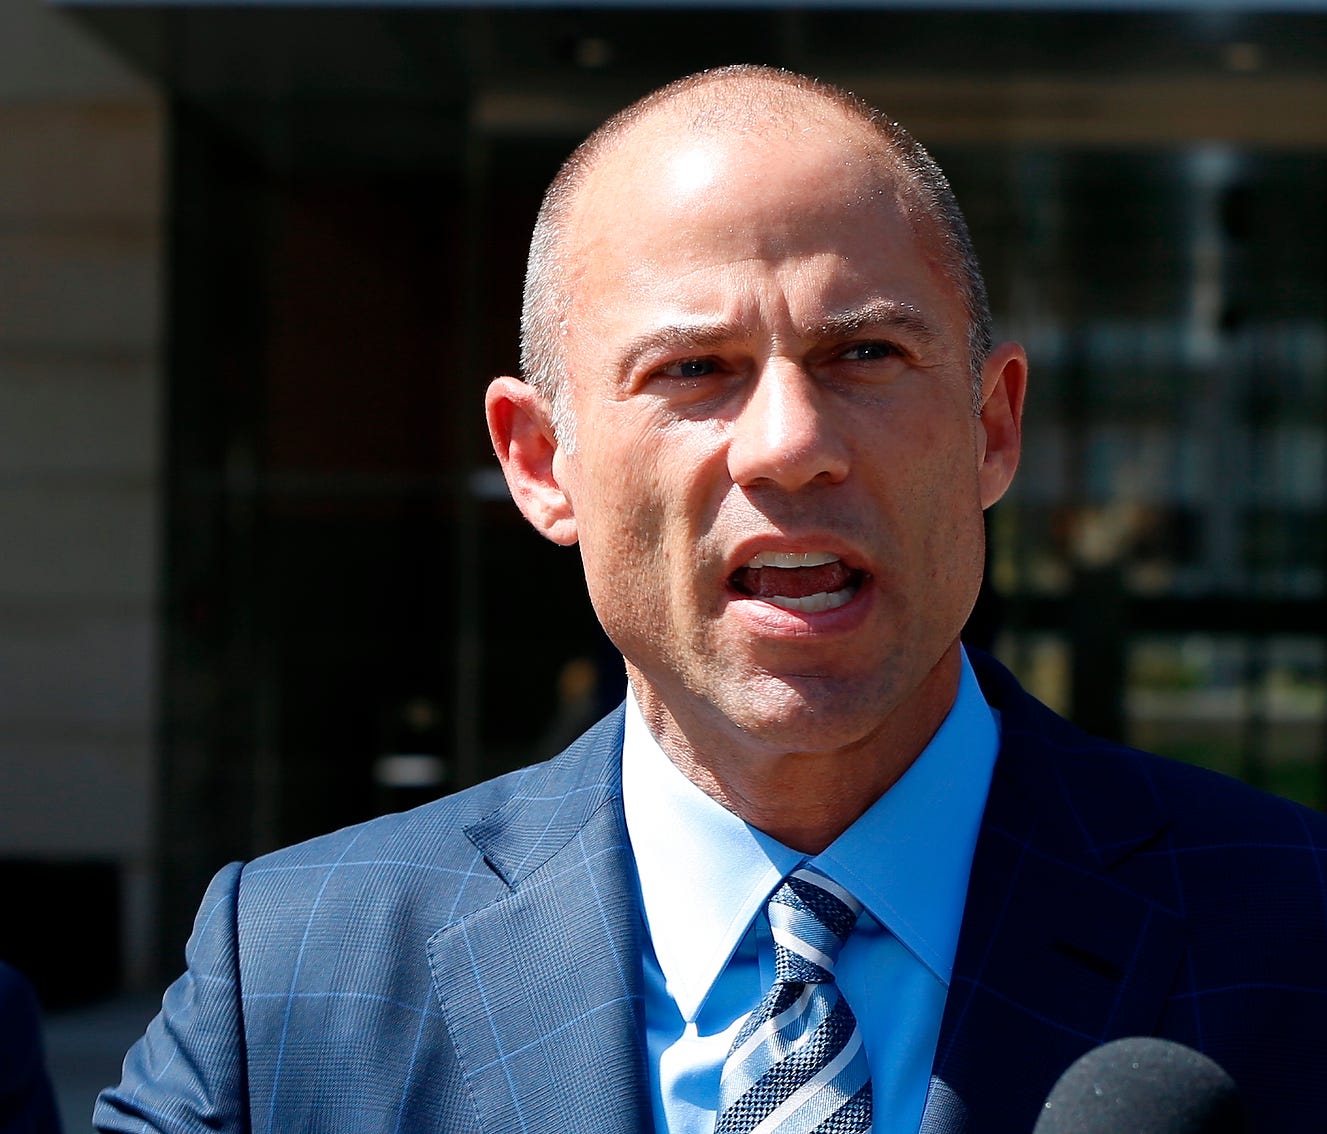 Michael Avenatti, attorney for porn actress Stormy Daniels, talks to the media outside court in Los Angeles April 20, 2018.